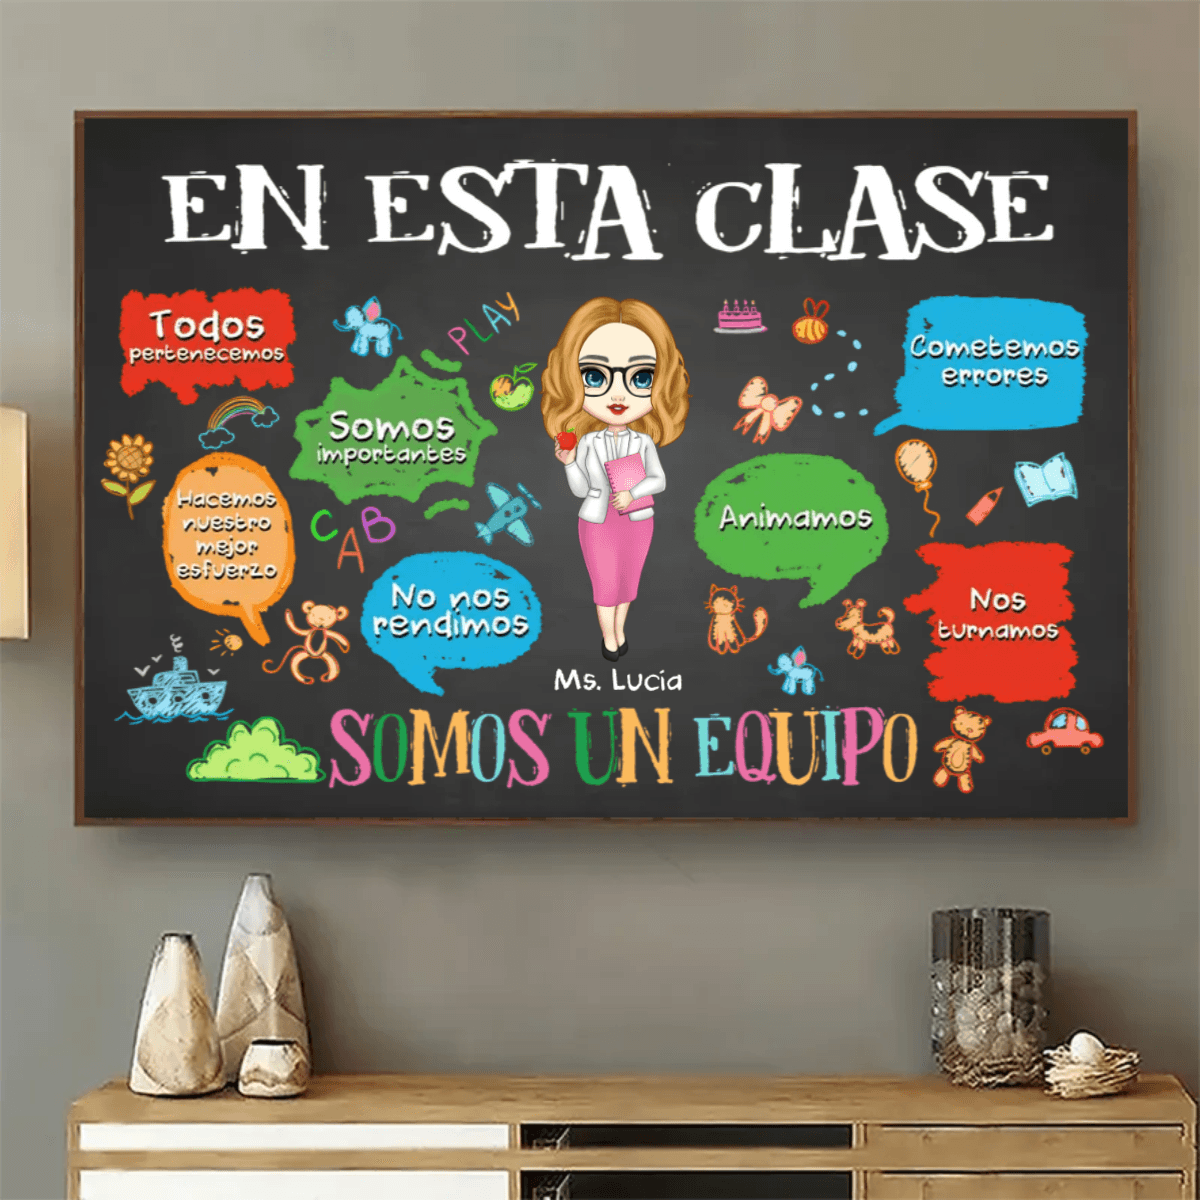 [Spanish Version] In This Classroom We Are A Team - Personalized Poster - Back To School, 1st Day of School - Custom Gift For Teachers & Educators, Classroom Decoration